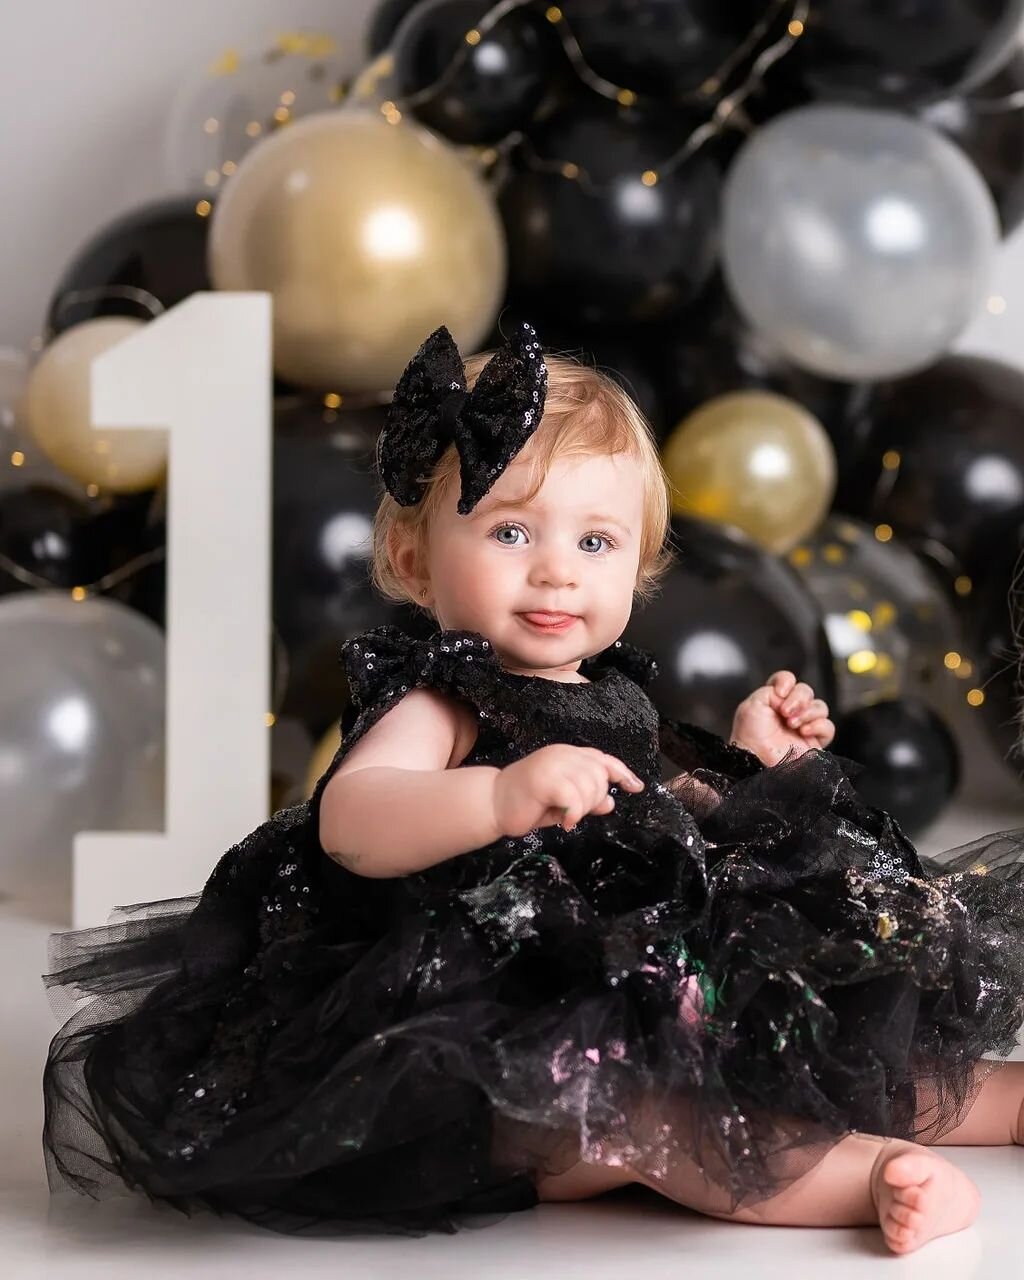 Just wanted to wish a very happy 1st birthday to one of my dearest and special clients CHLOE 🖤

#firstbirthday #newmarketmoms #newmarketphotostudio #newmarketphotographer #cakesmashphotography #birthdaygirl #torontofamilyphotographer #torontophotogr